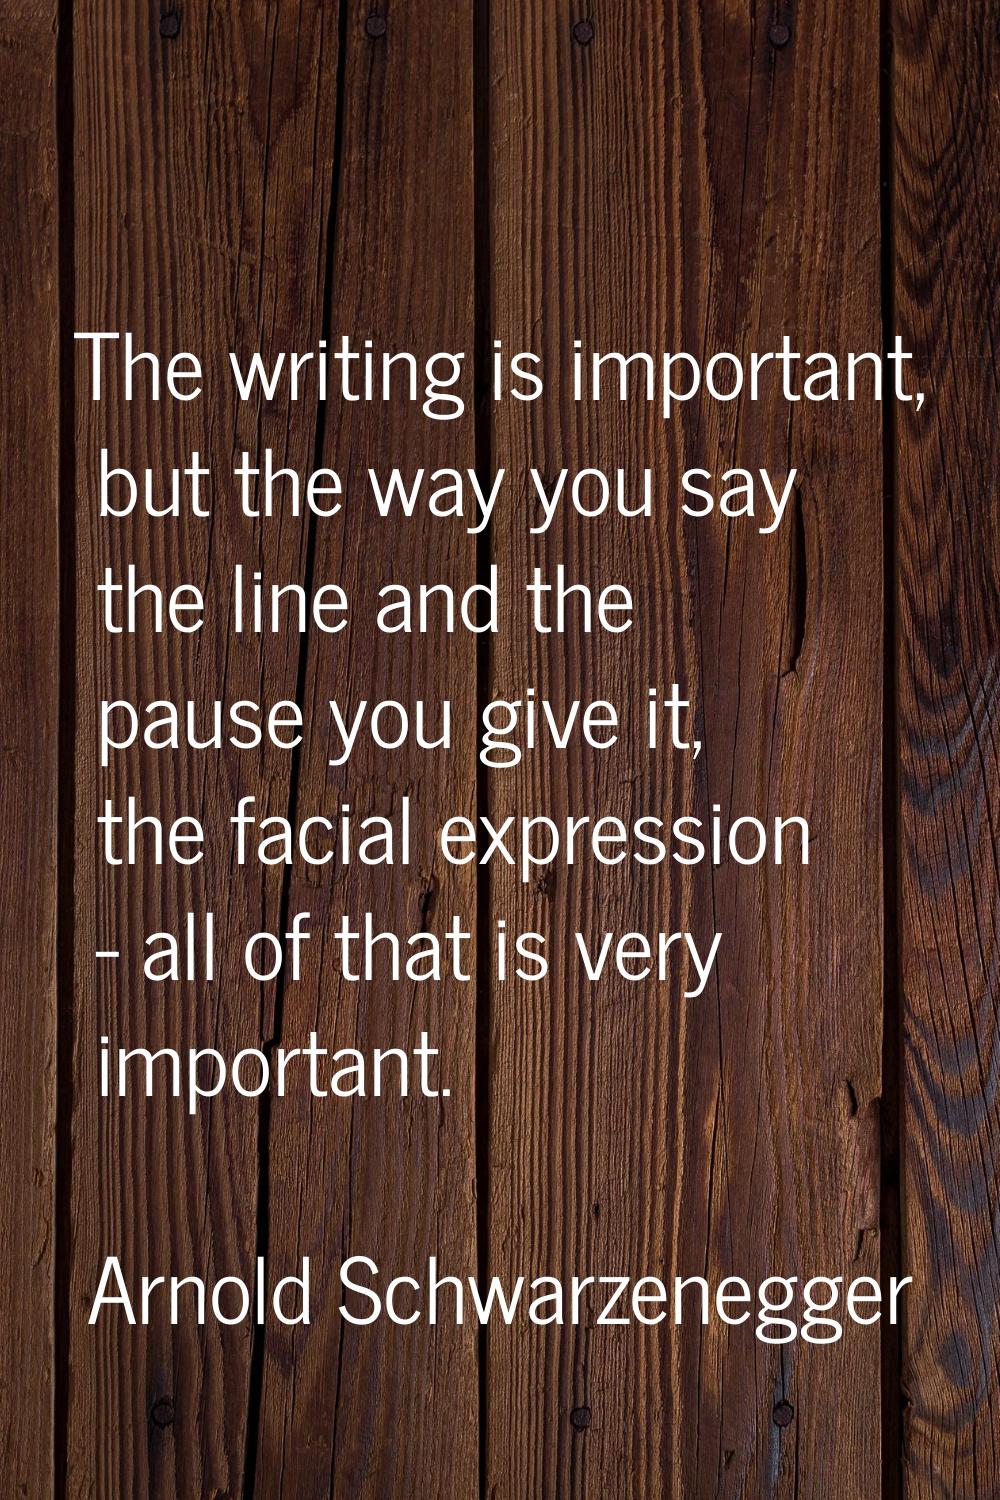 The writing is important, but the way you say the line and the pause you give it, the facial expres